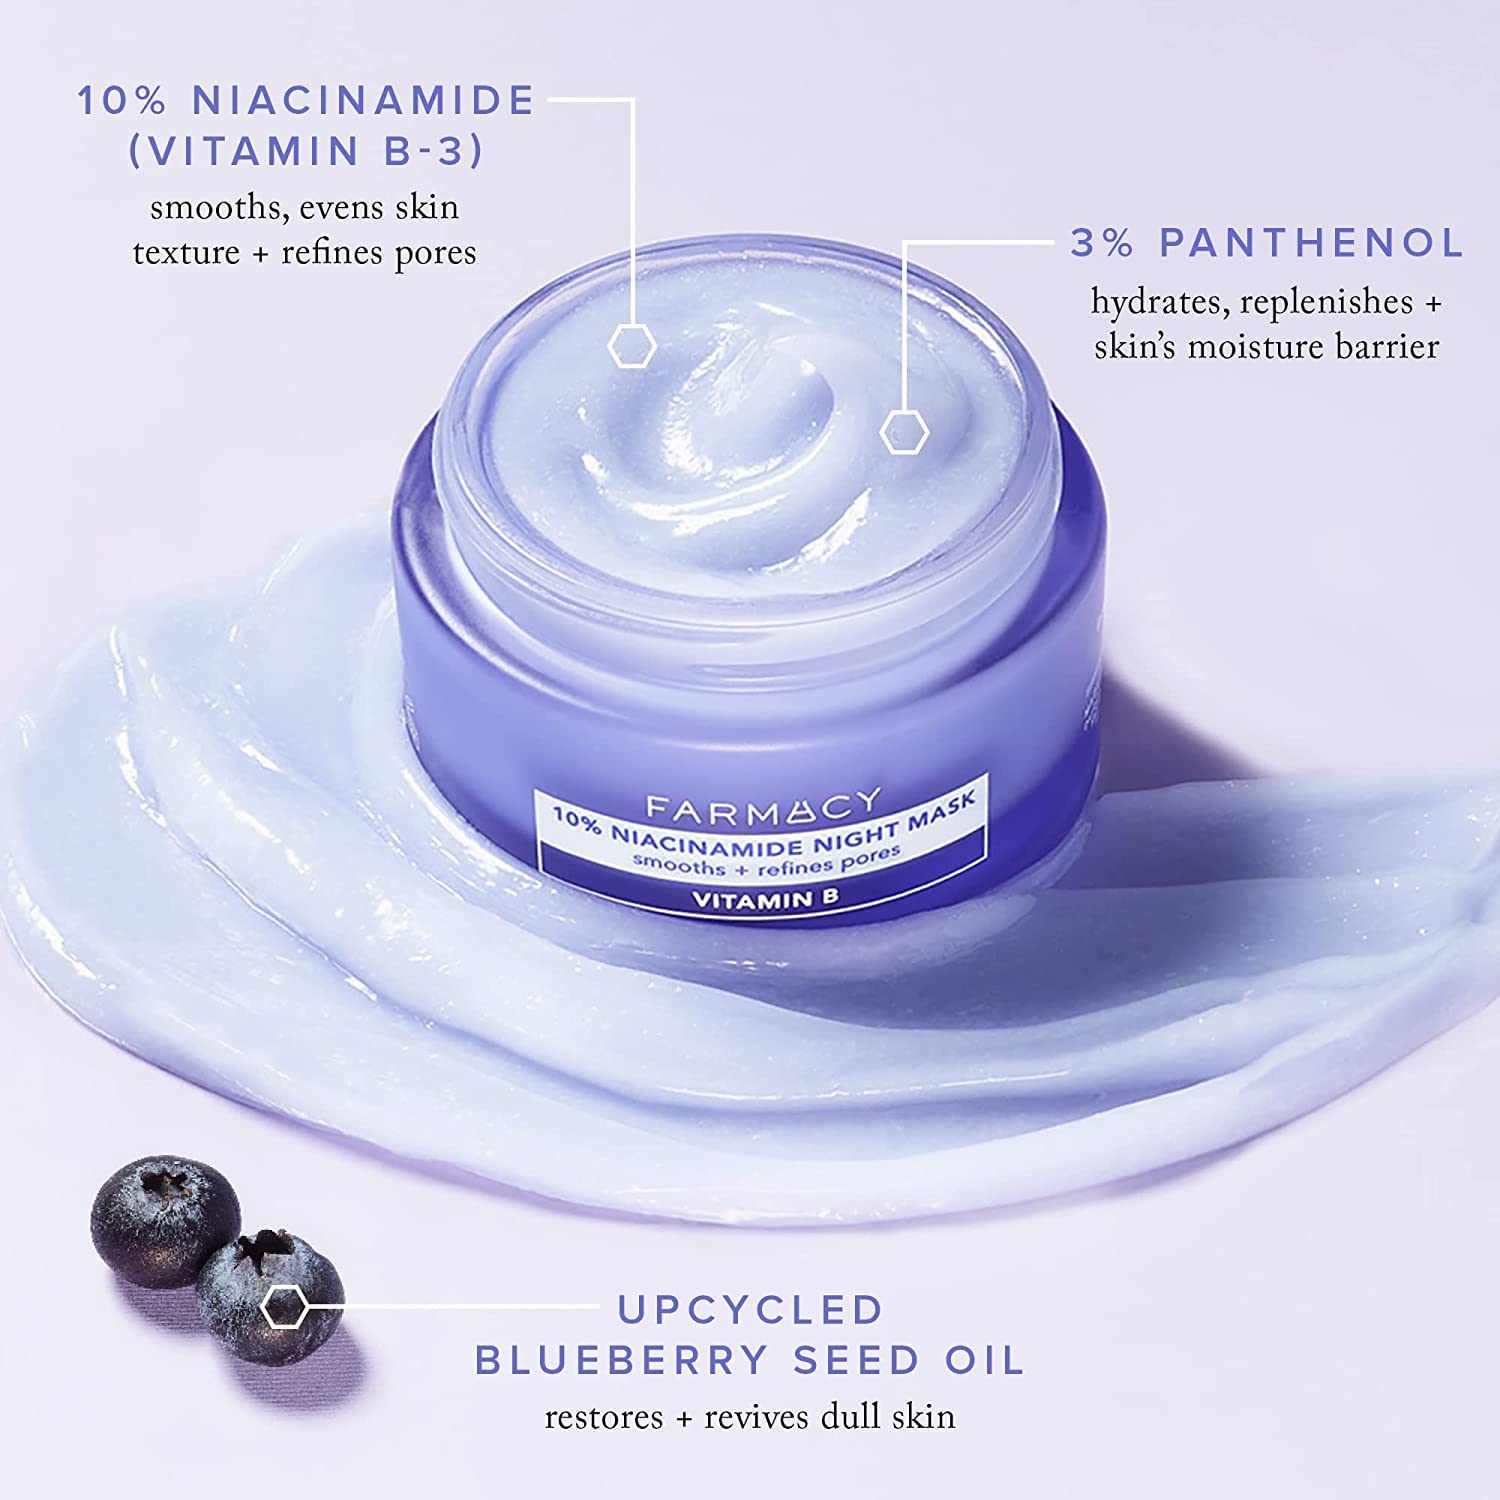 Farmacy 10% Niacinamide Facial Mask - Smoothing & Hydrating Skin Care Face Mask - Panthenol & Niacinamide Cream - Overnight Face Mask, 9 ml : Beauty & Personal Care